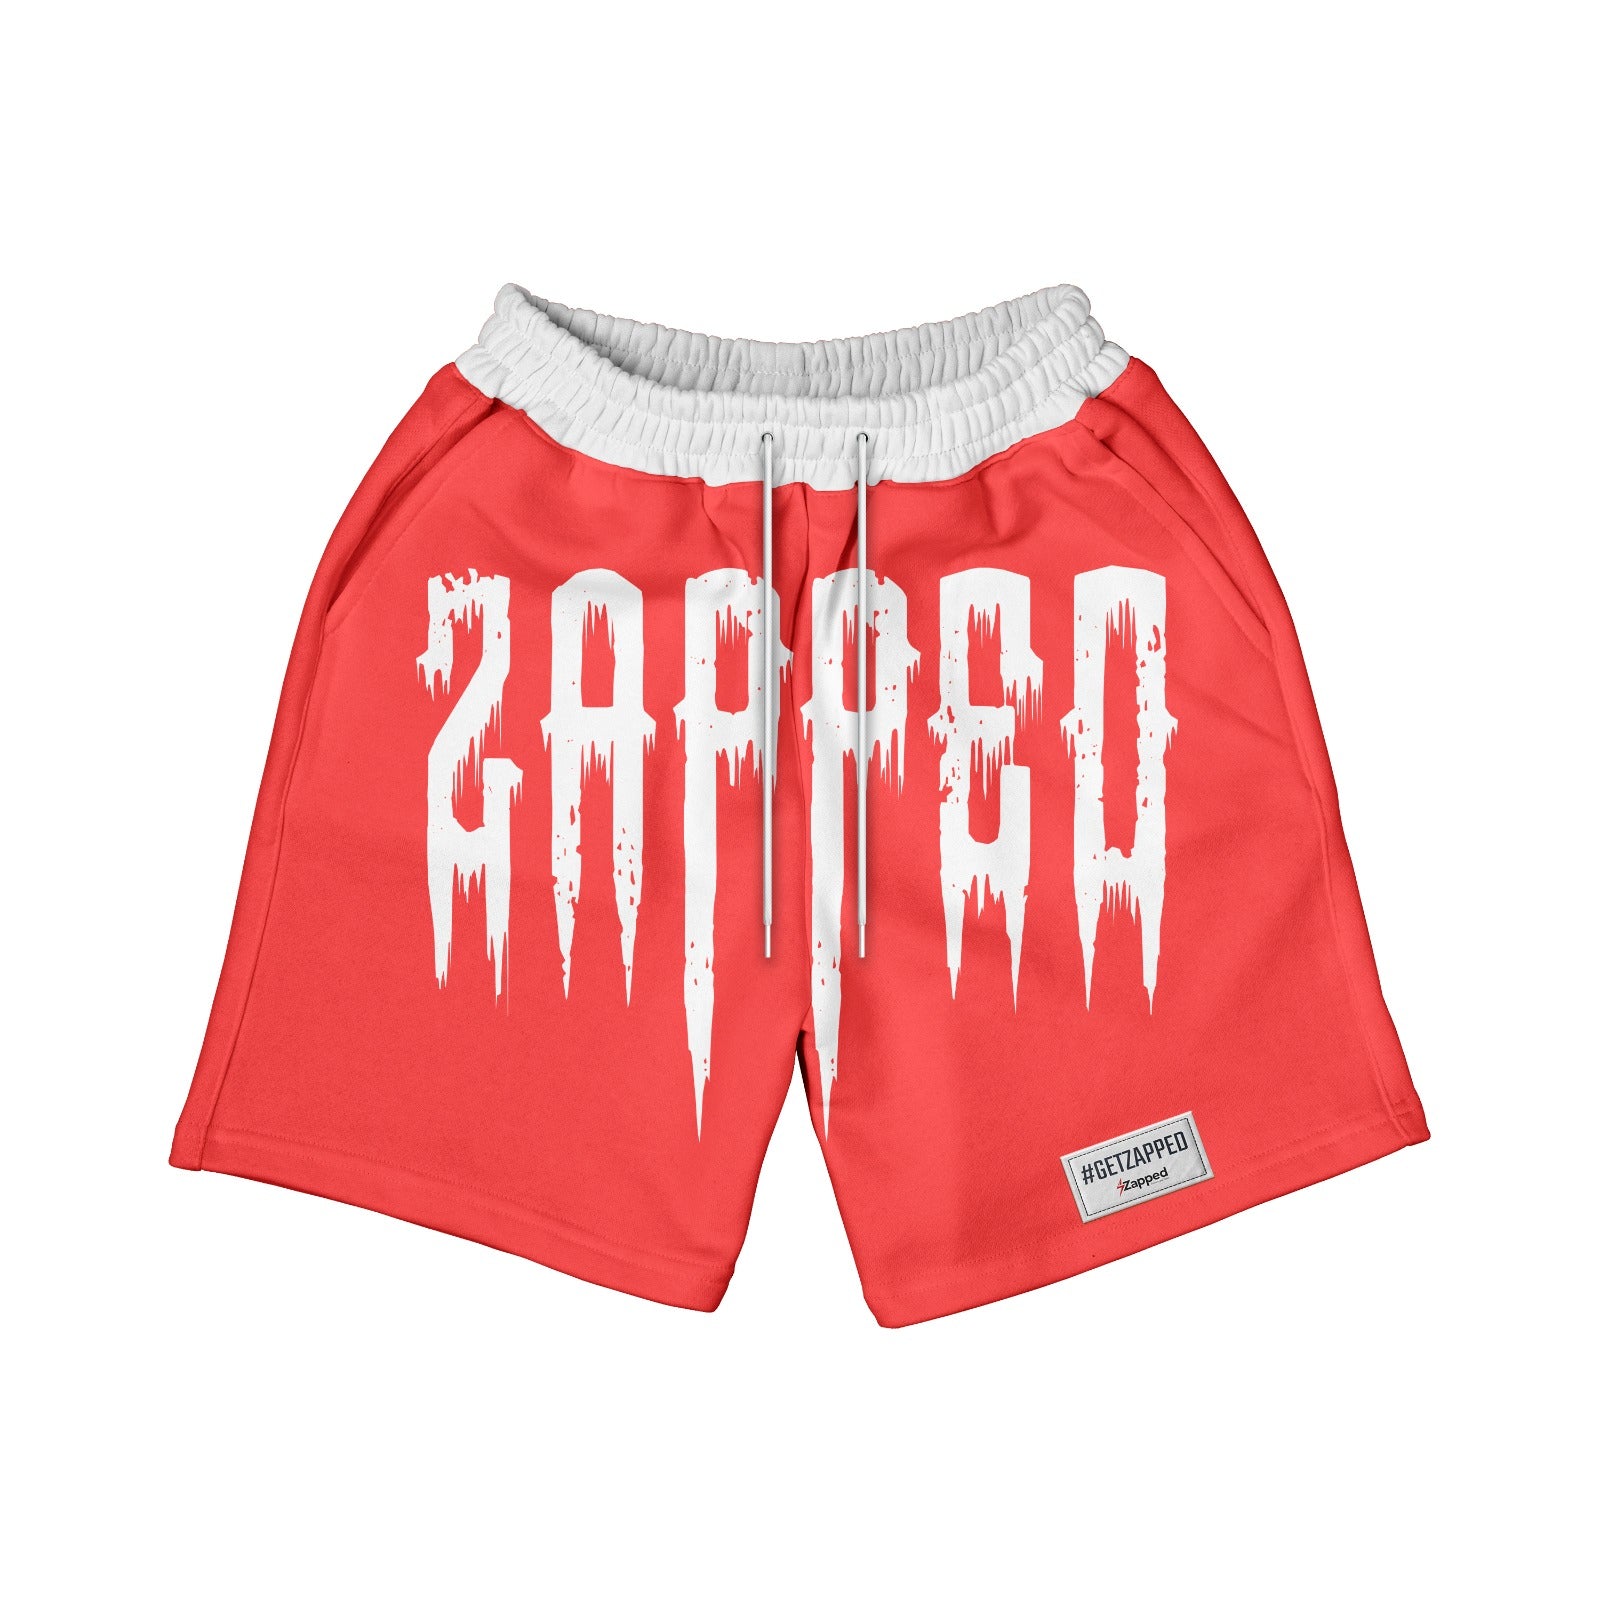 Zapped Red Cotton Shorts